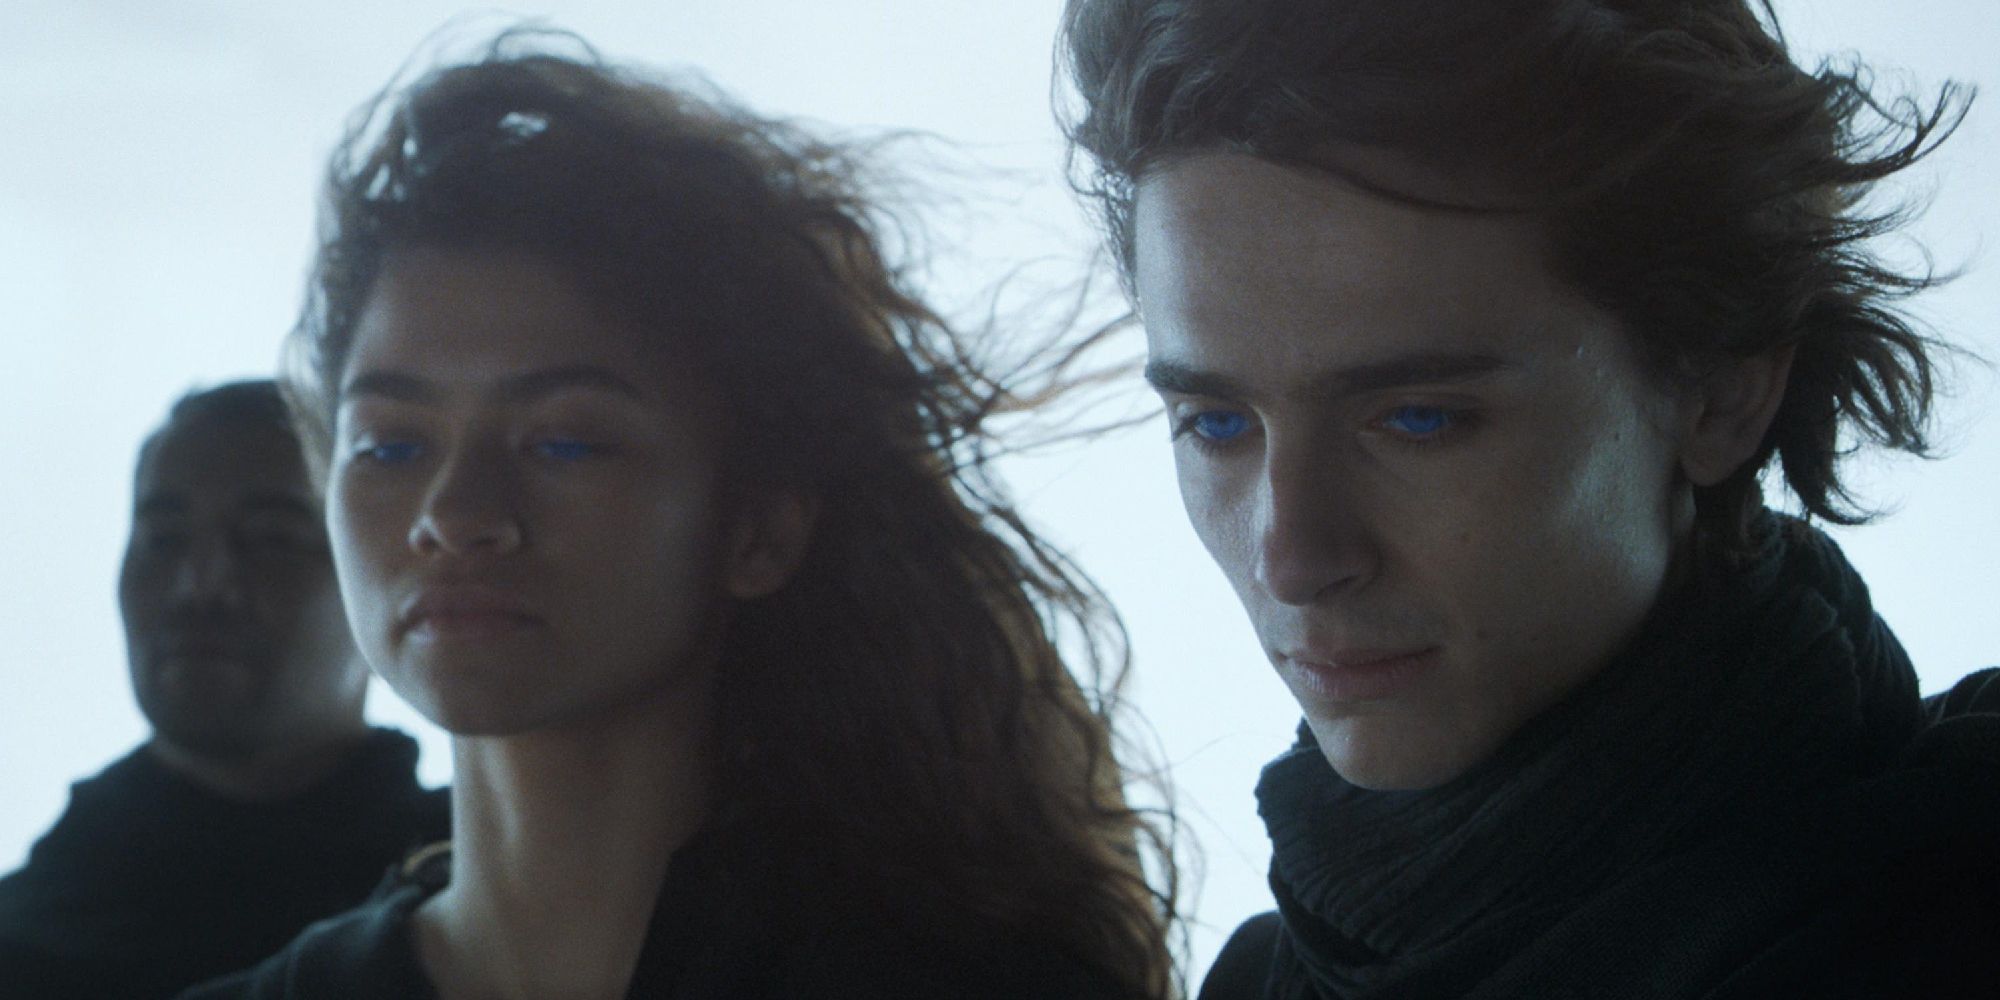 Timothee Chalemet and Zendaya with glowing blue eyes in Dune